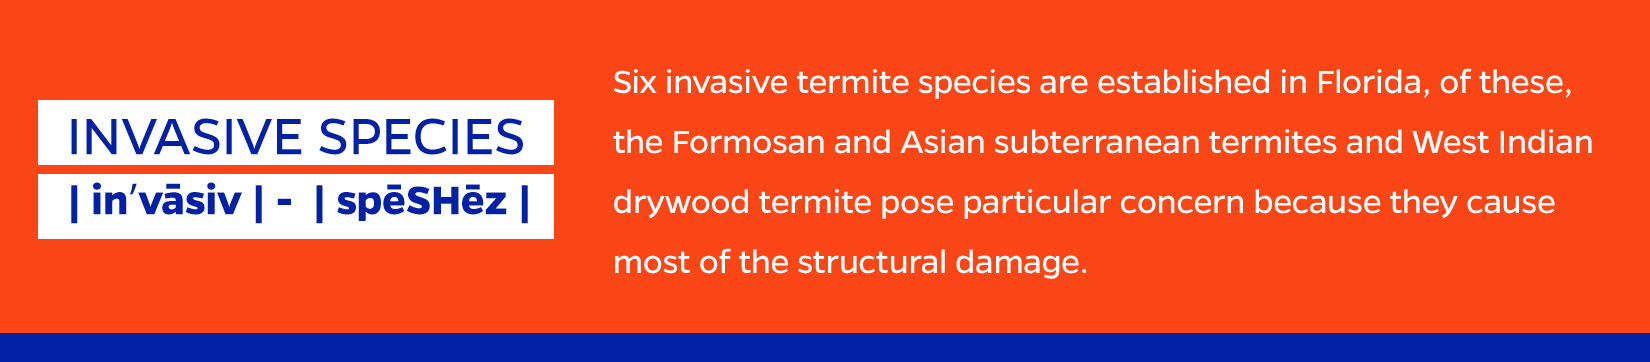 FAST FACT:  Six invasive termite species are established in Florida, and among these, the Formosan subterranean termite, the Asian subterranean termite and the West Indian drywood termite pose particular concern for residents and the pest-control industry because they cause most of the structural damage.  Asian and Formosan termites have the ability to mate and potentially create a new, hybrid spe